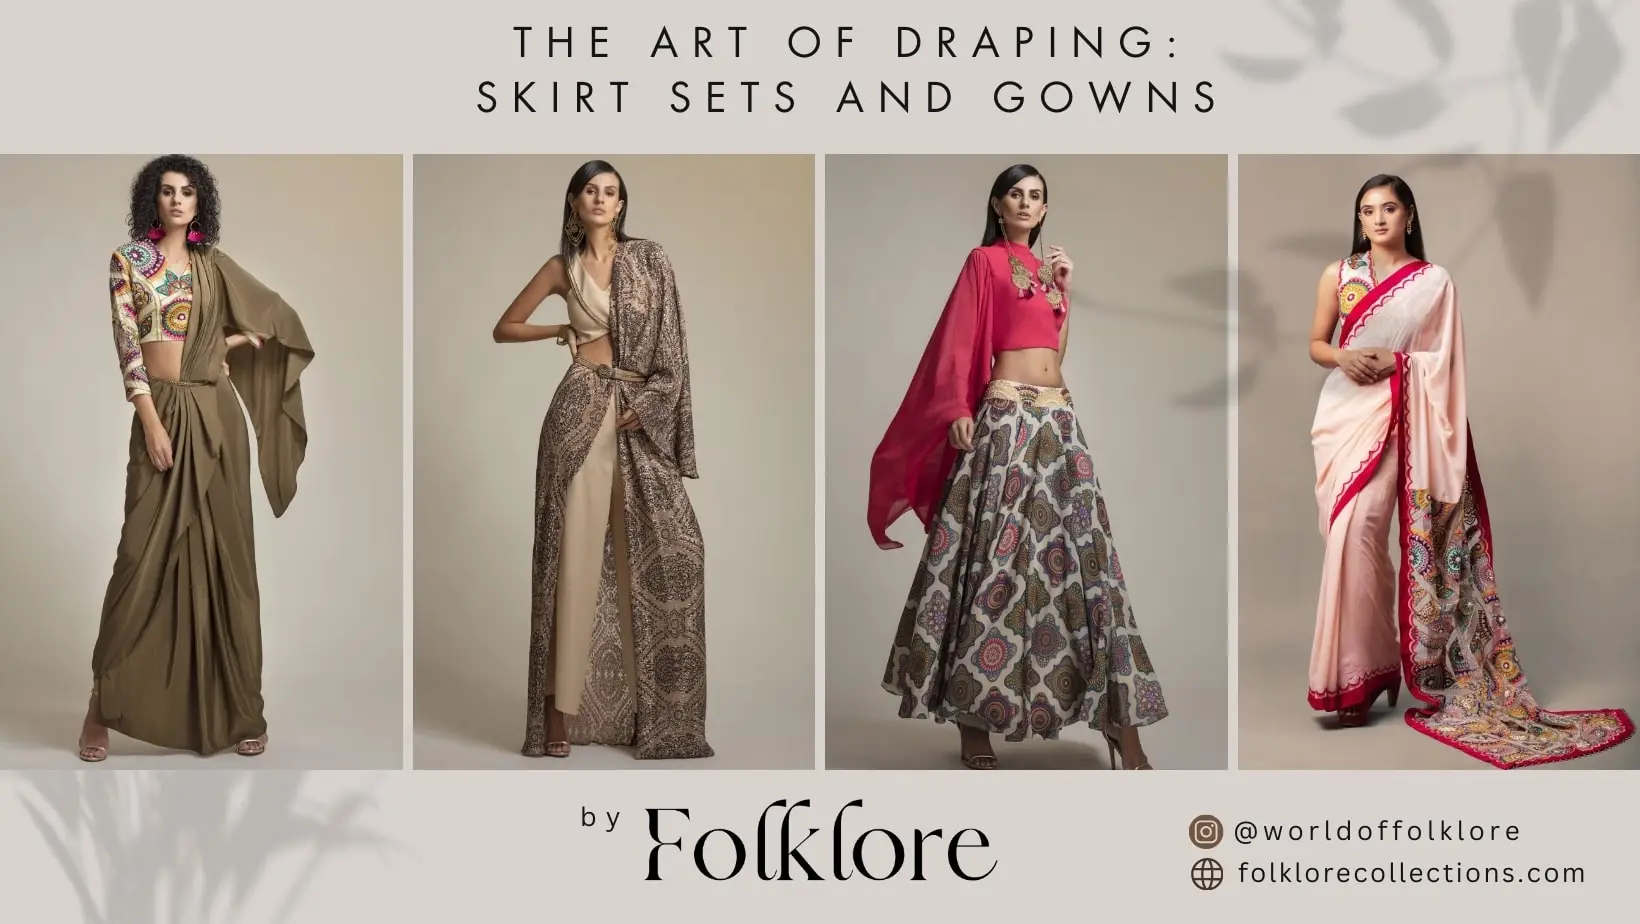 The Art of Draping: Skirt Sets and Gowns Inspired by Folklore